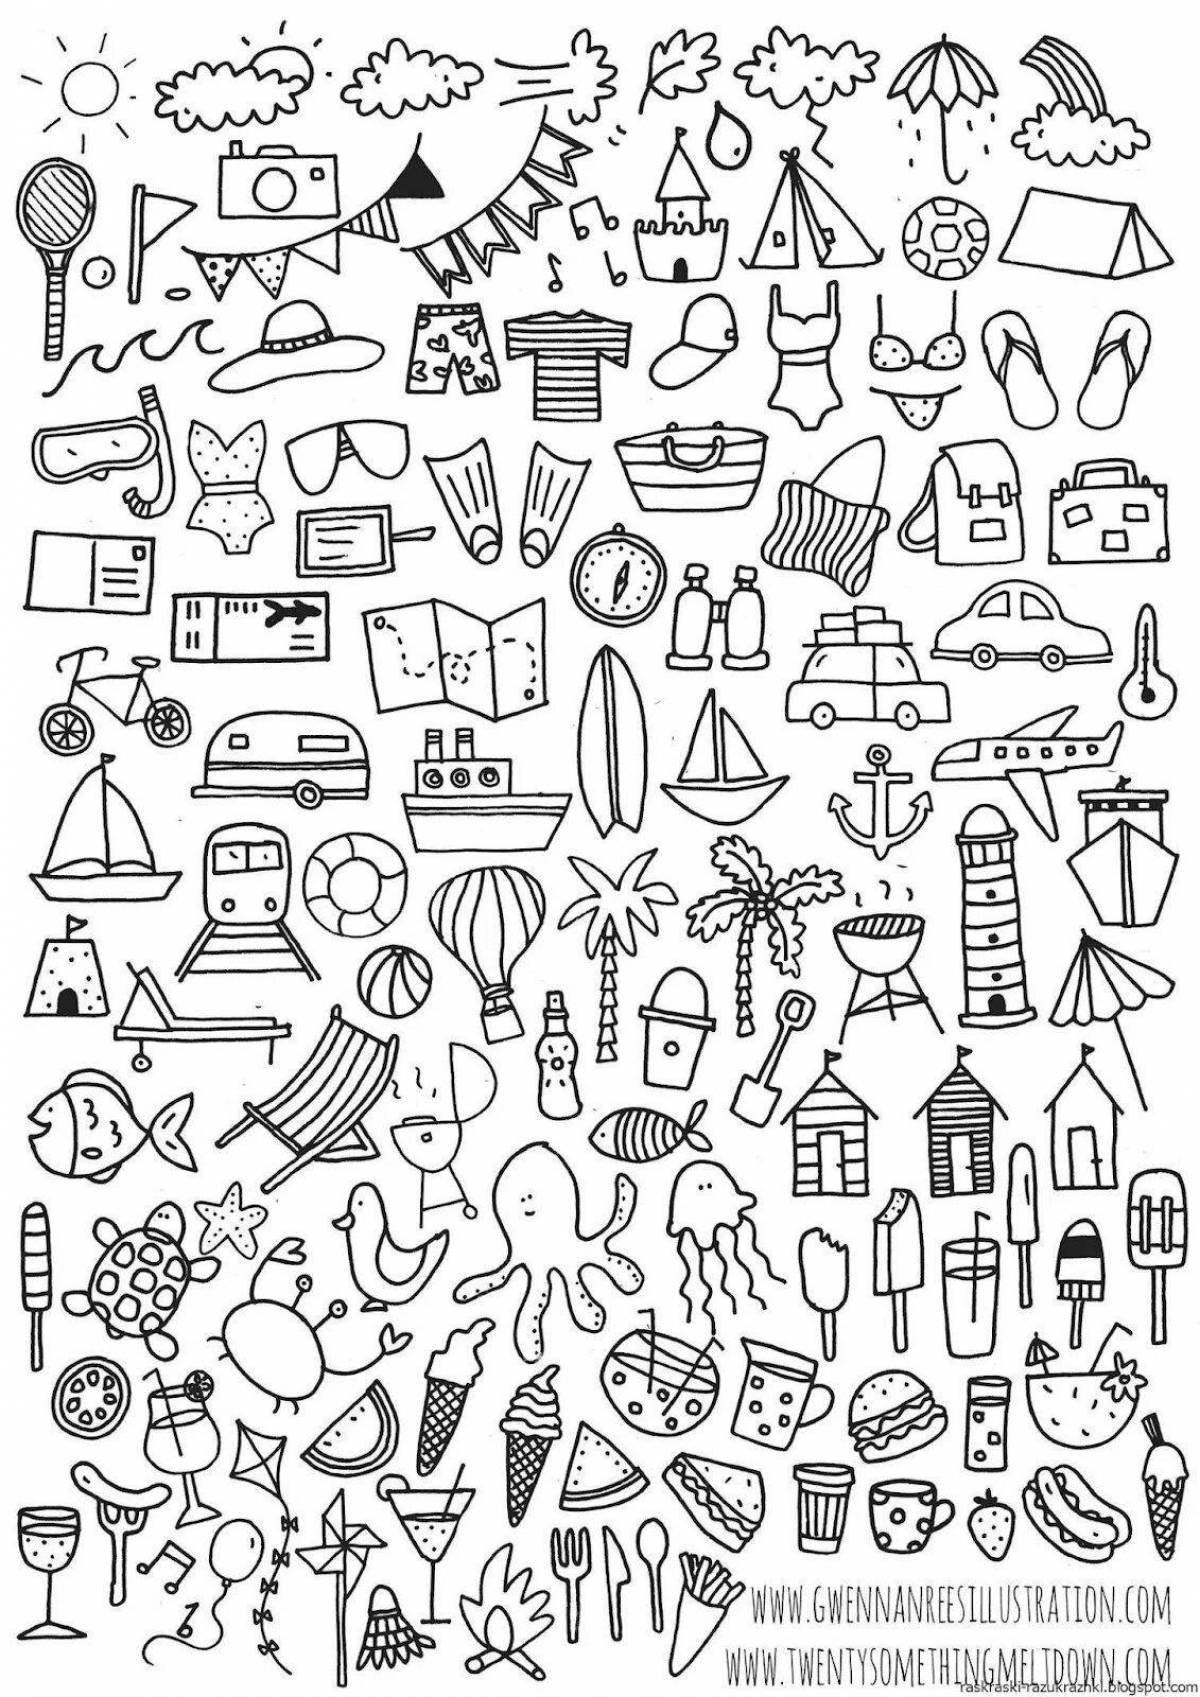 Fun coloring pages with stickers